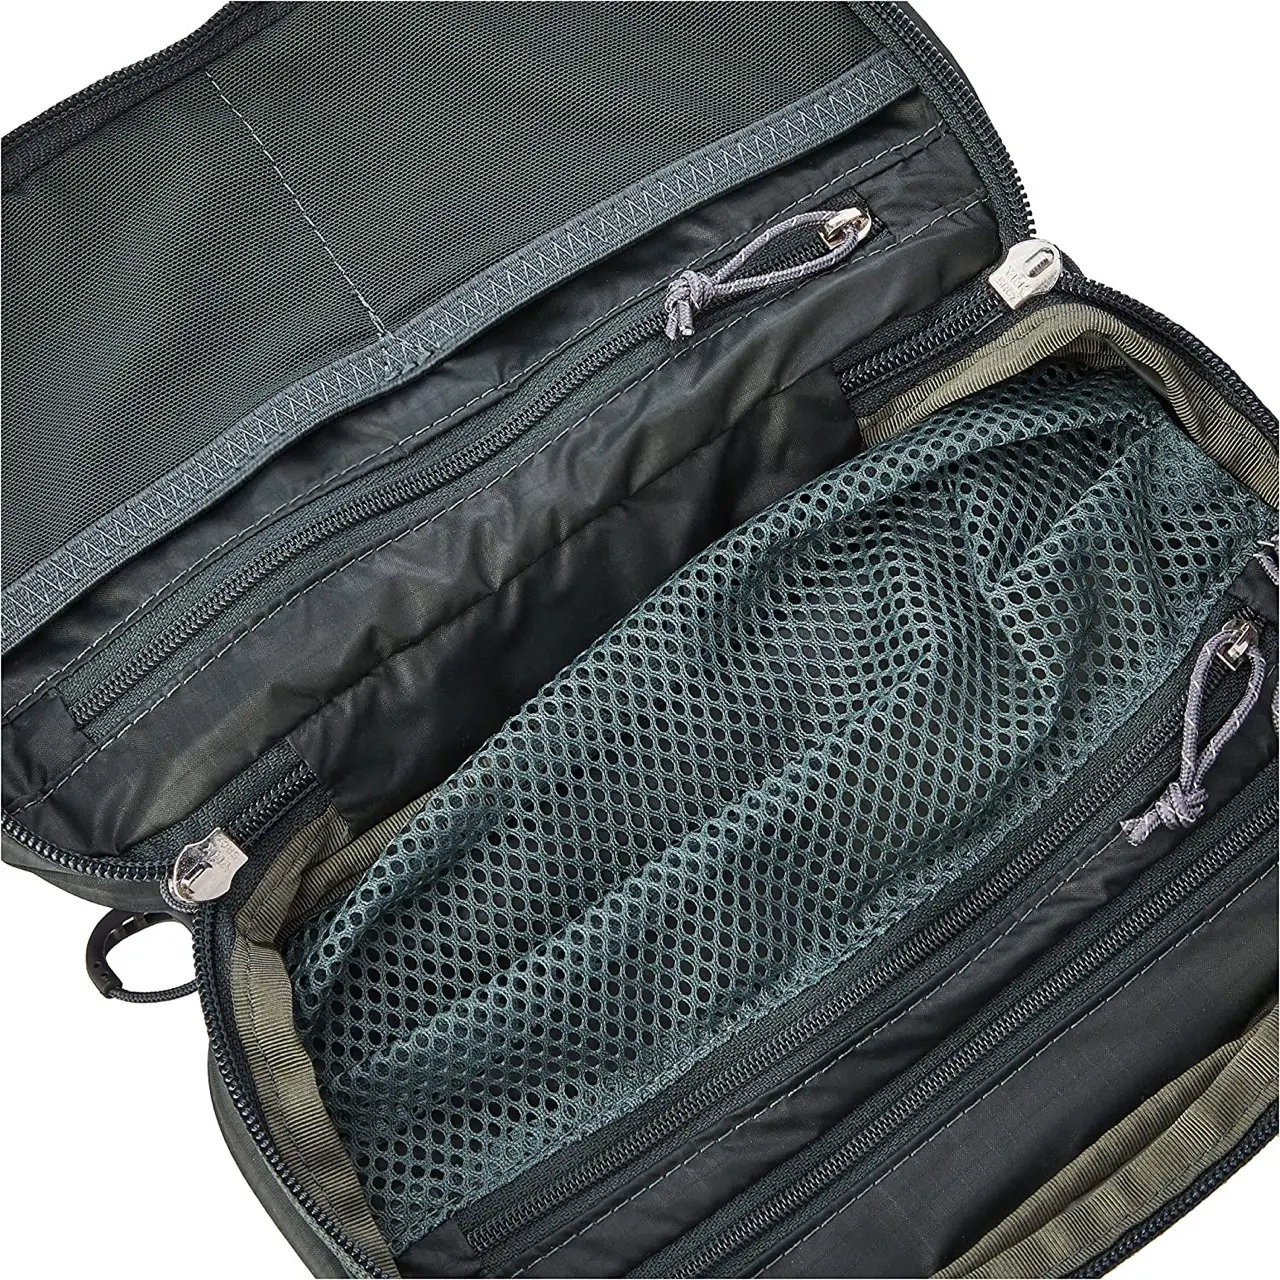 Osprey UltraLight Zip Organizer middle compartment